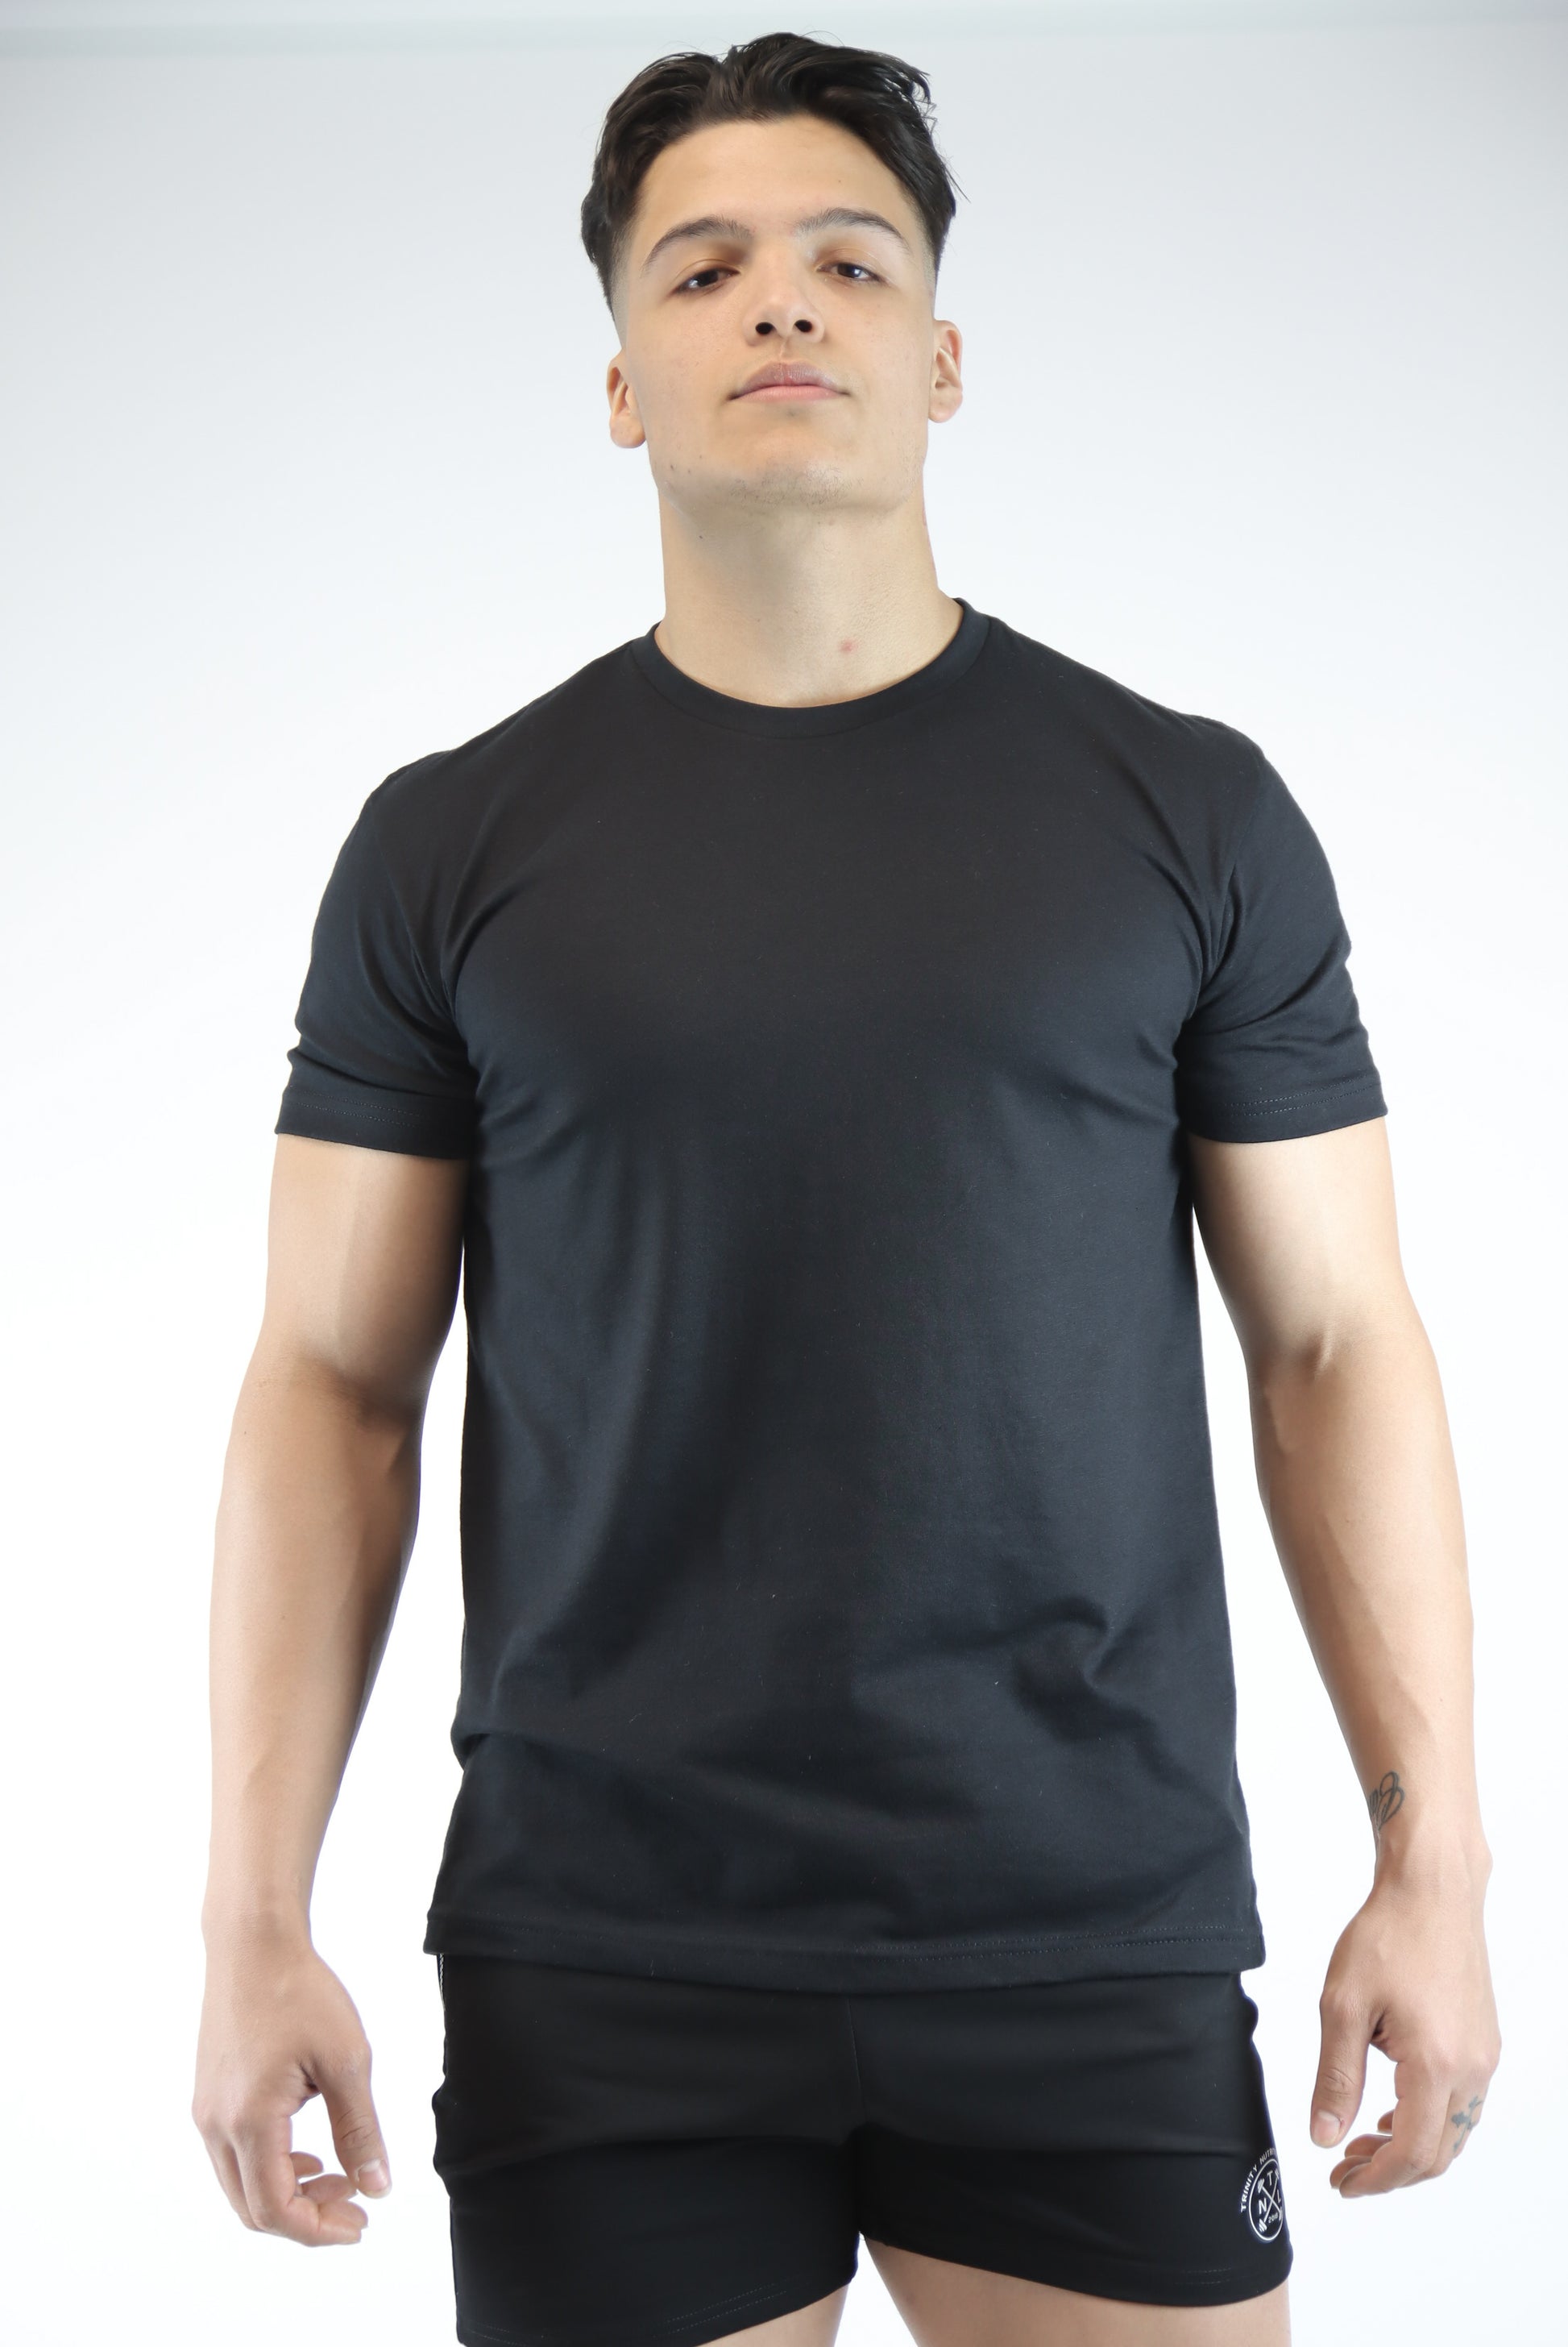 Best fit t-shirt for gym